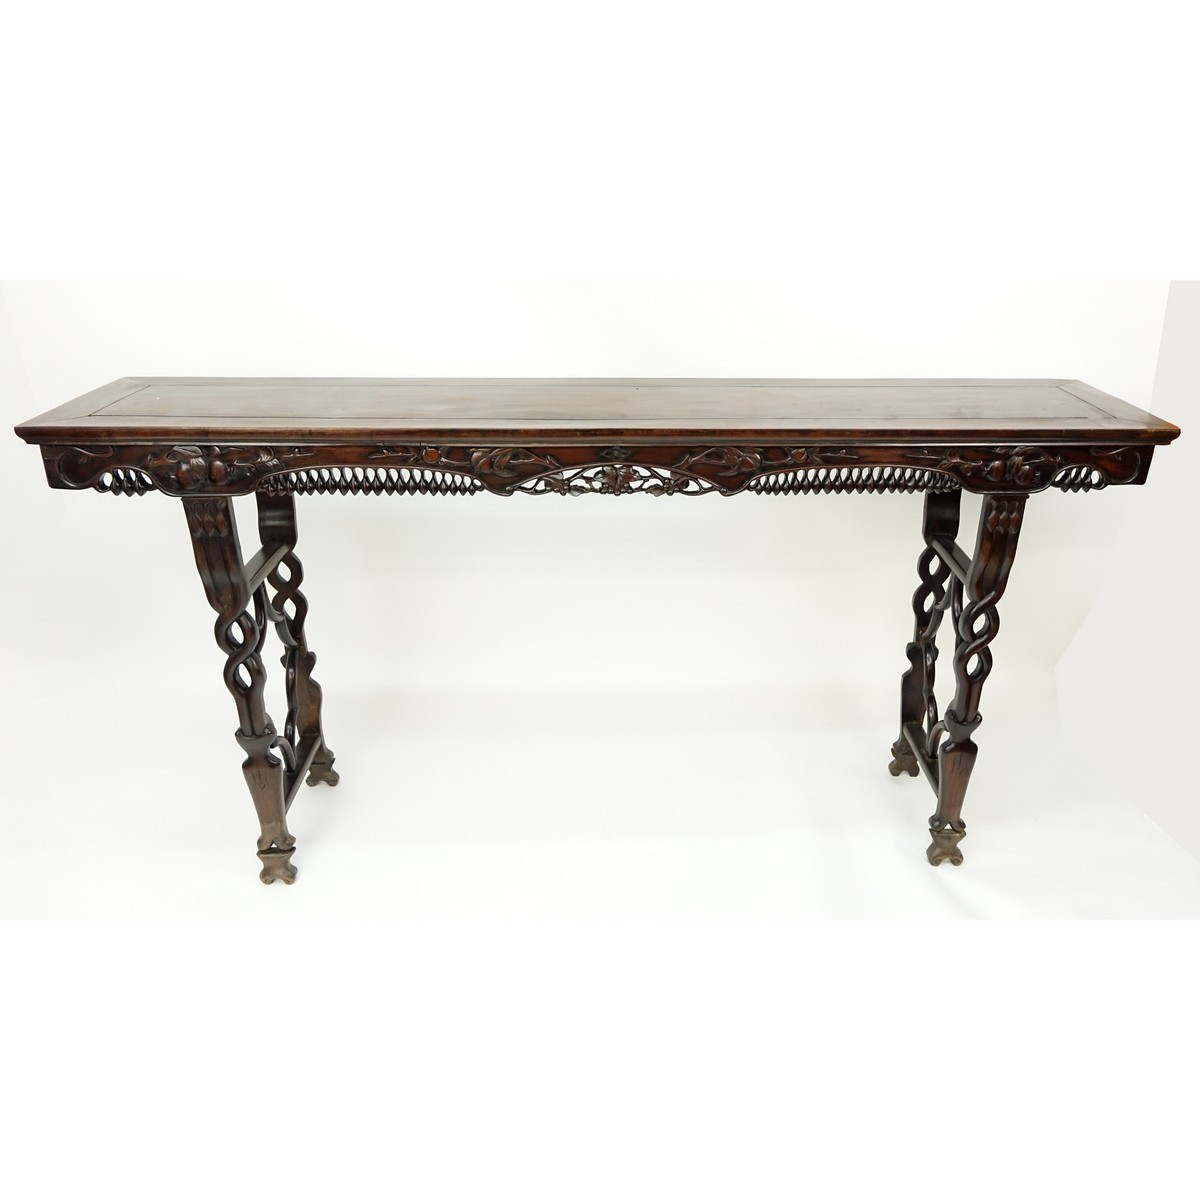 Chinese Deep Carved Rosewood Alter Table. Carved and openwork on apron, deep carved legs.